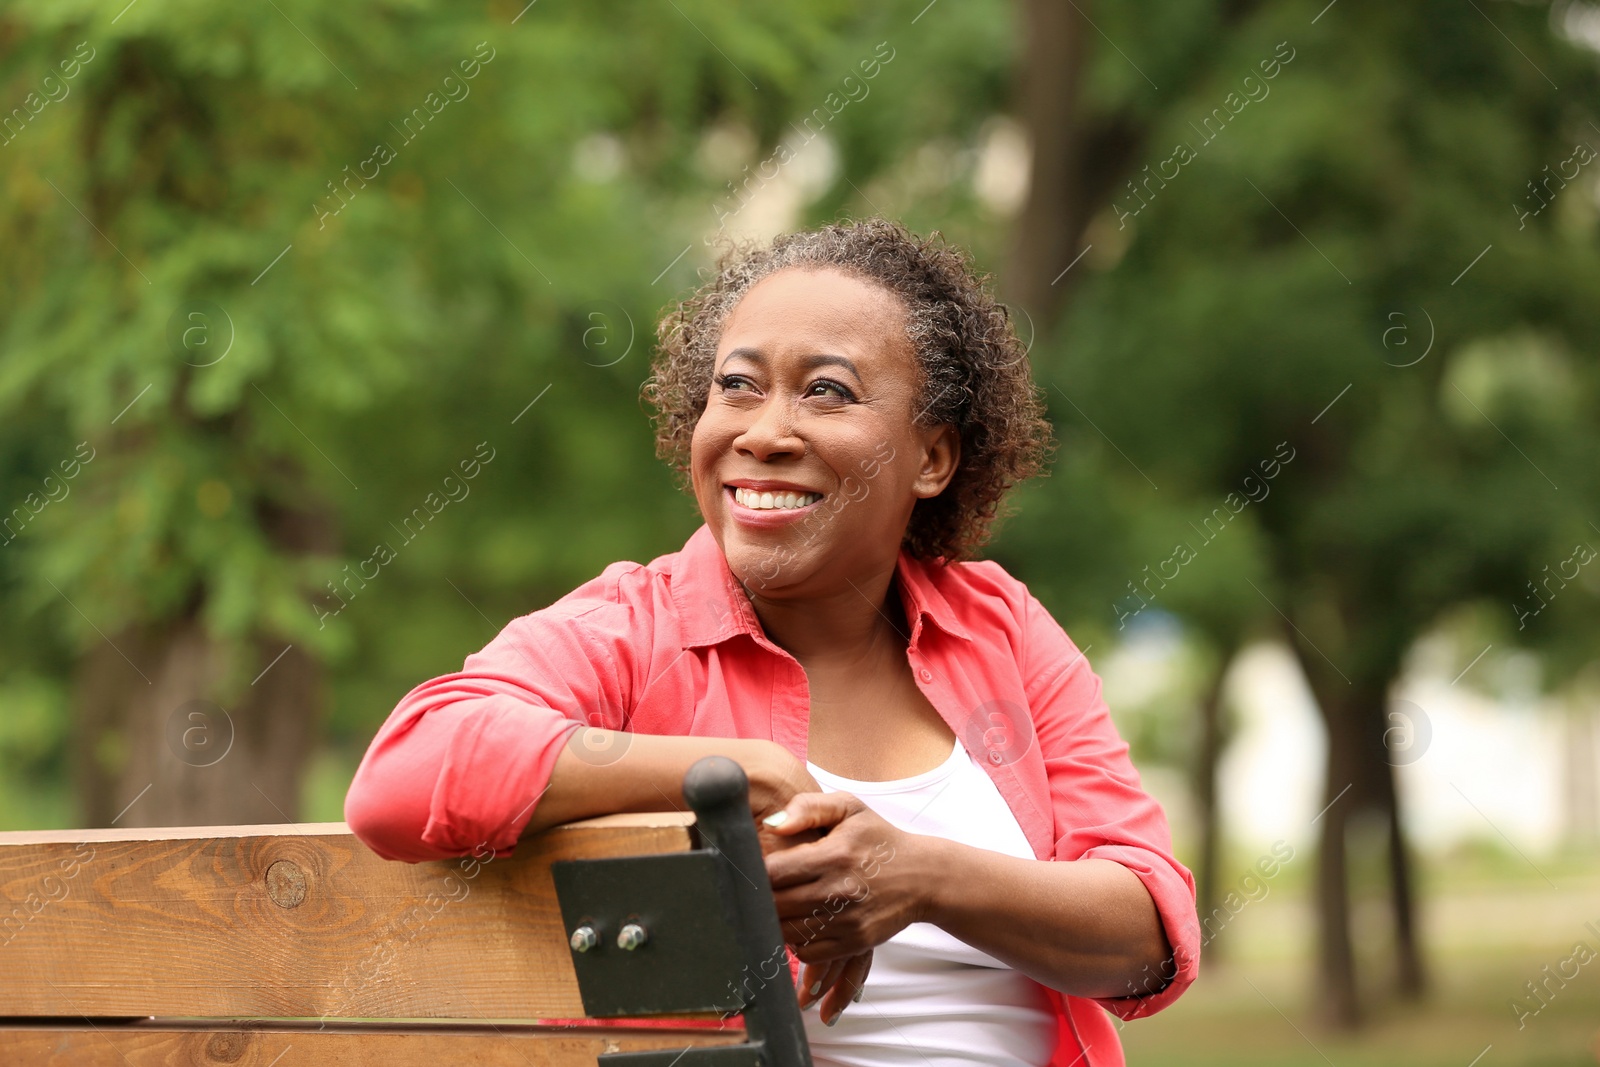 Photo of Portrait of happy African-American woman on bench in park